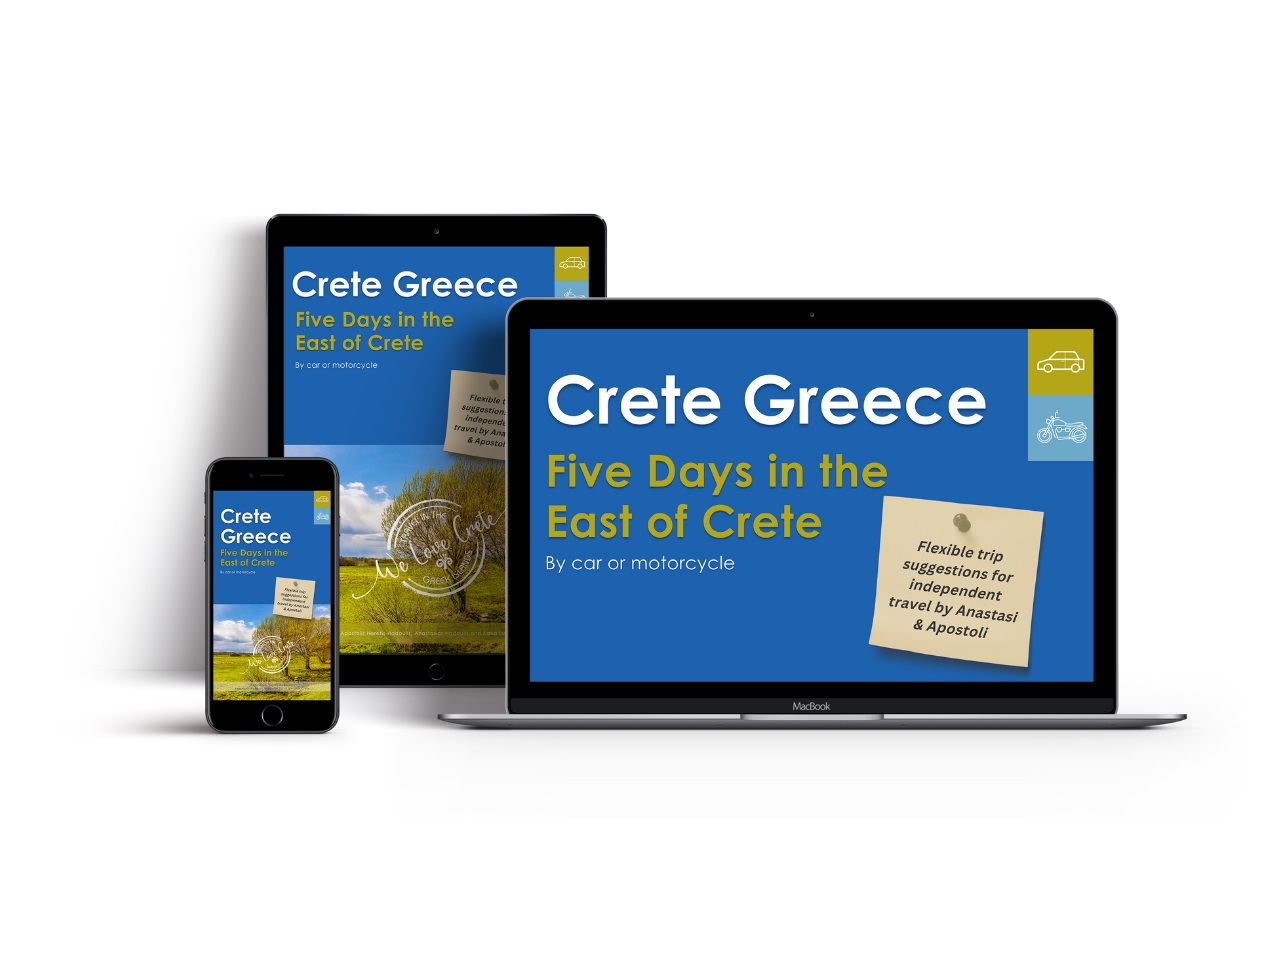 Mini Guide ebook - Five Days in the East of Crete by Car or Motorcycle